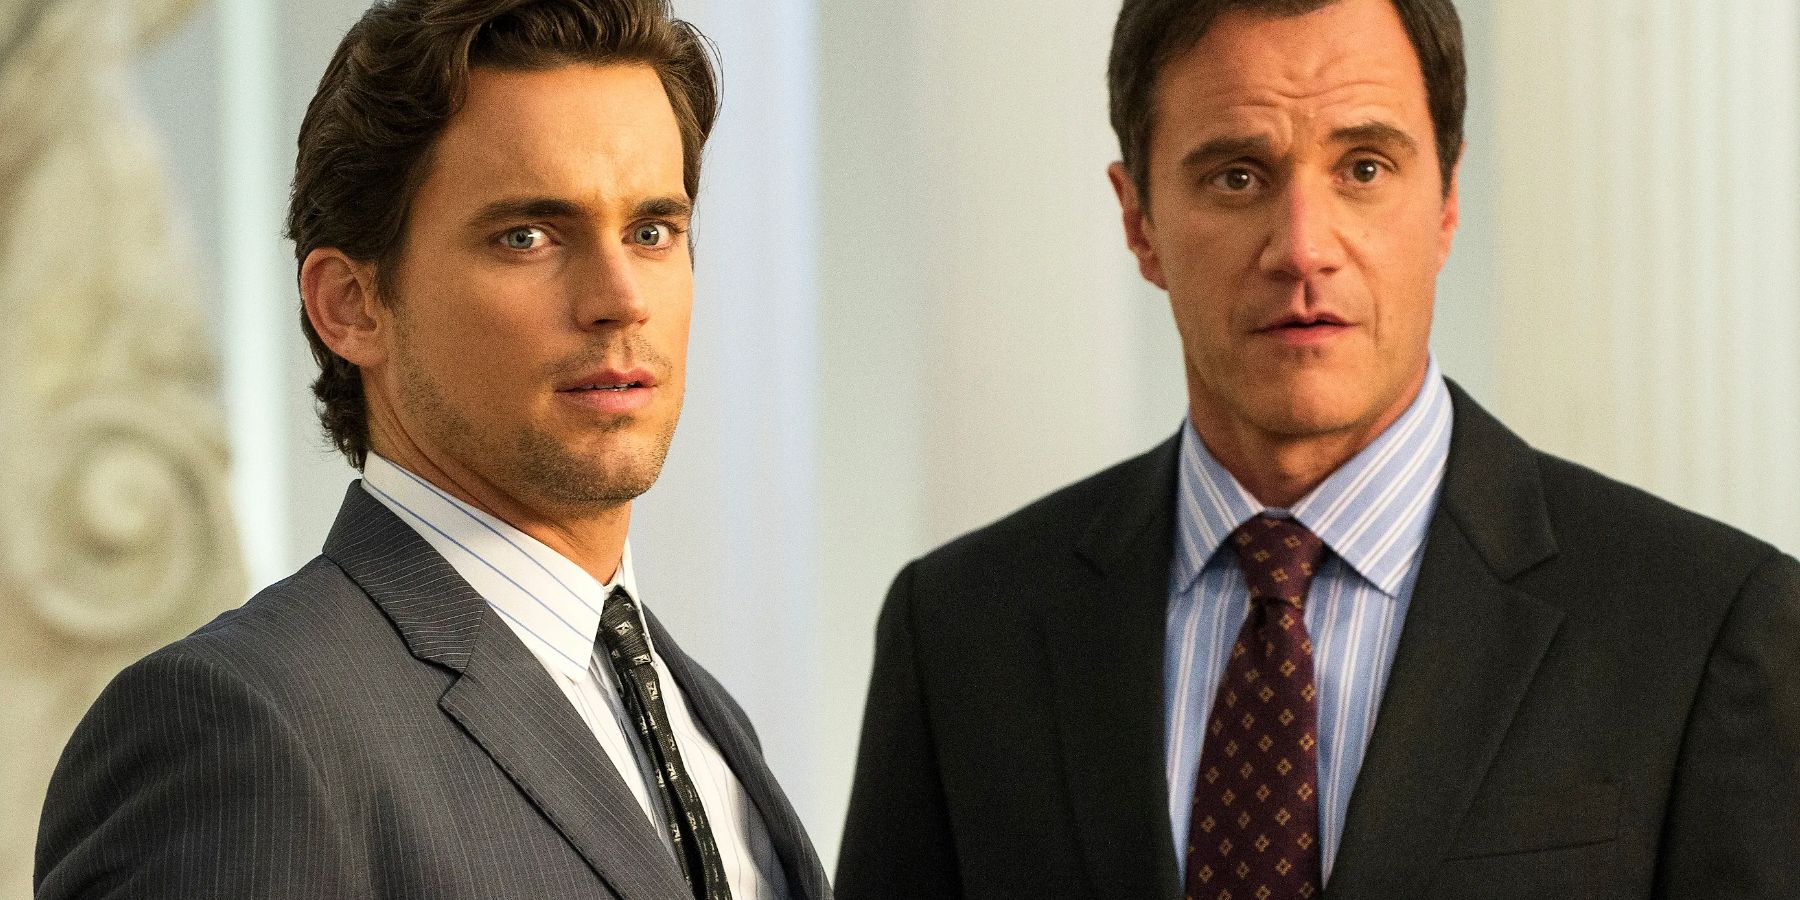 Matt Bomer as Neal Caffrey and Tim Dekay as Peter Burke standing next to each other and appearing amused in White Collar